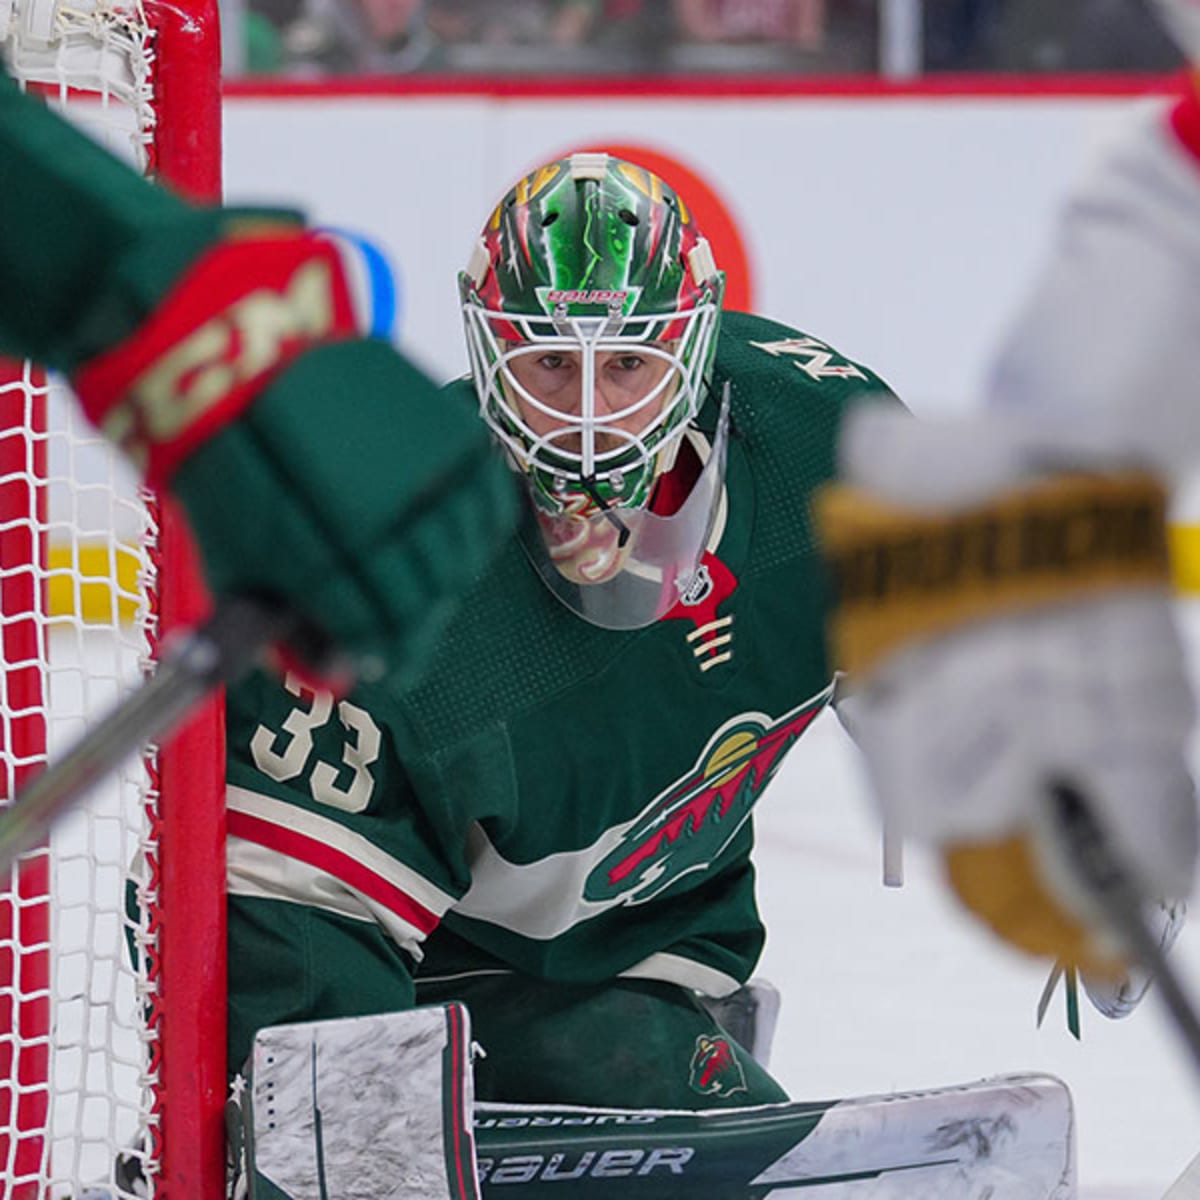 Talbot, Wild blank Vegas 3-0 as Fleury watches from bench